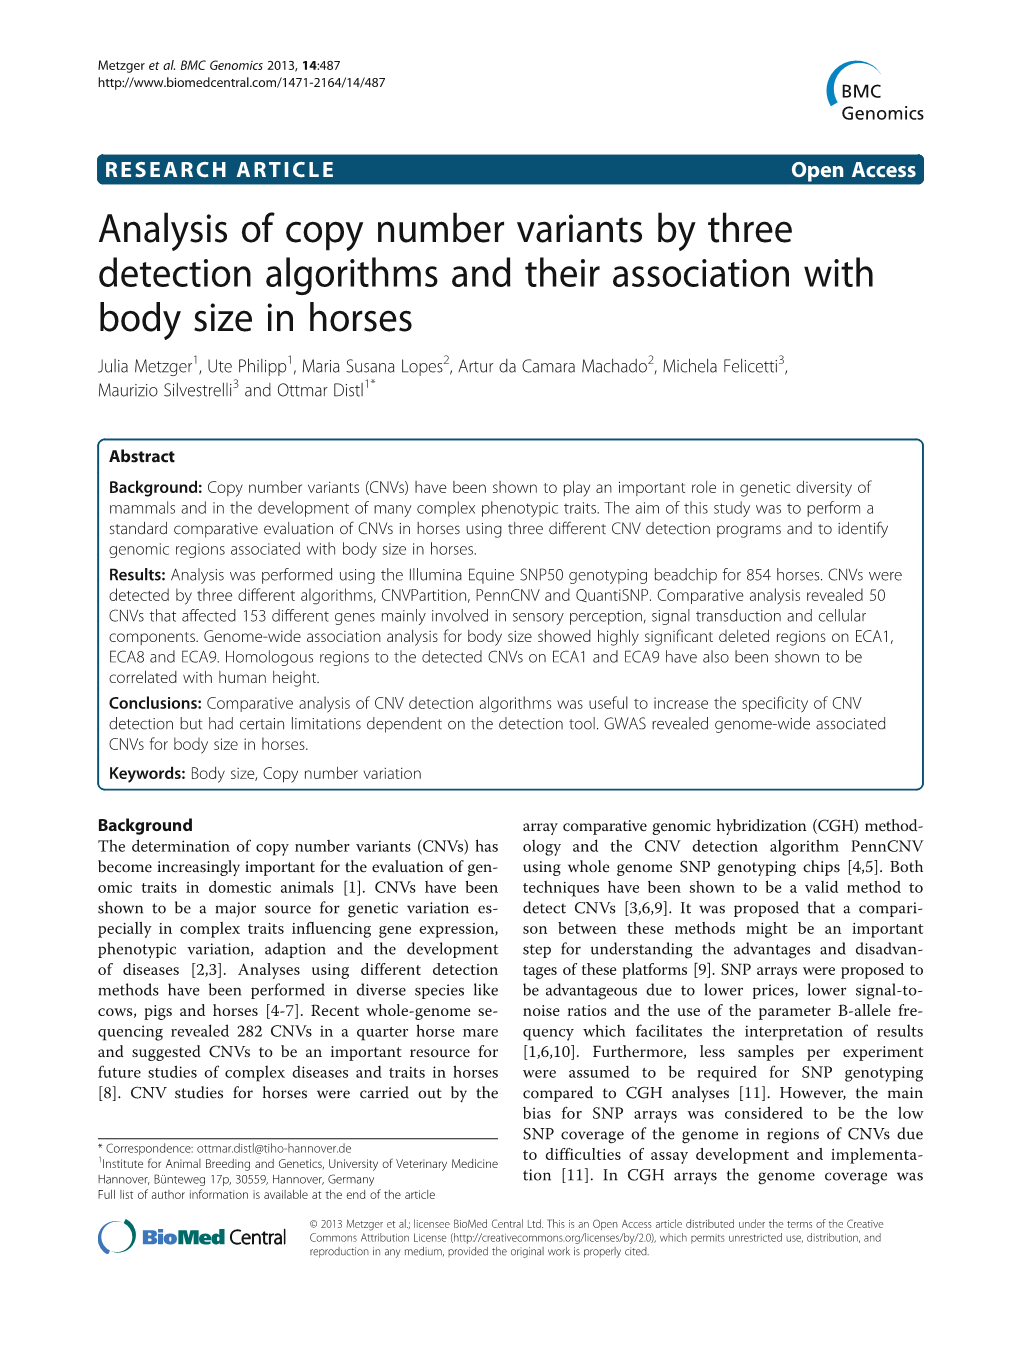 Analysis of Copy Number Variants by Three Detection Algorithms and Their